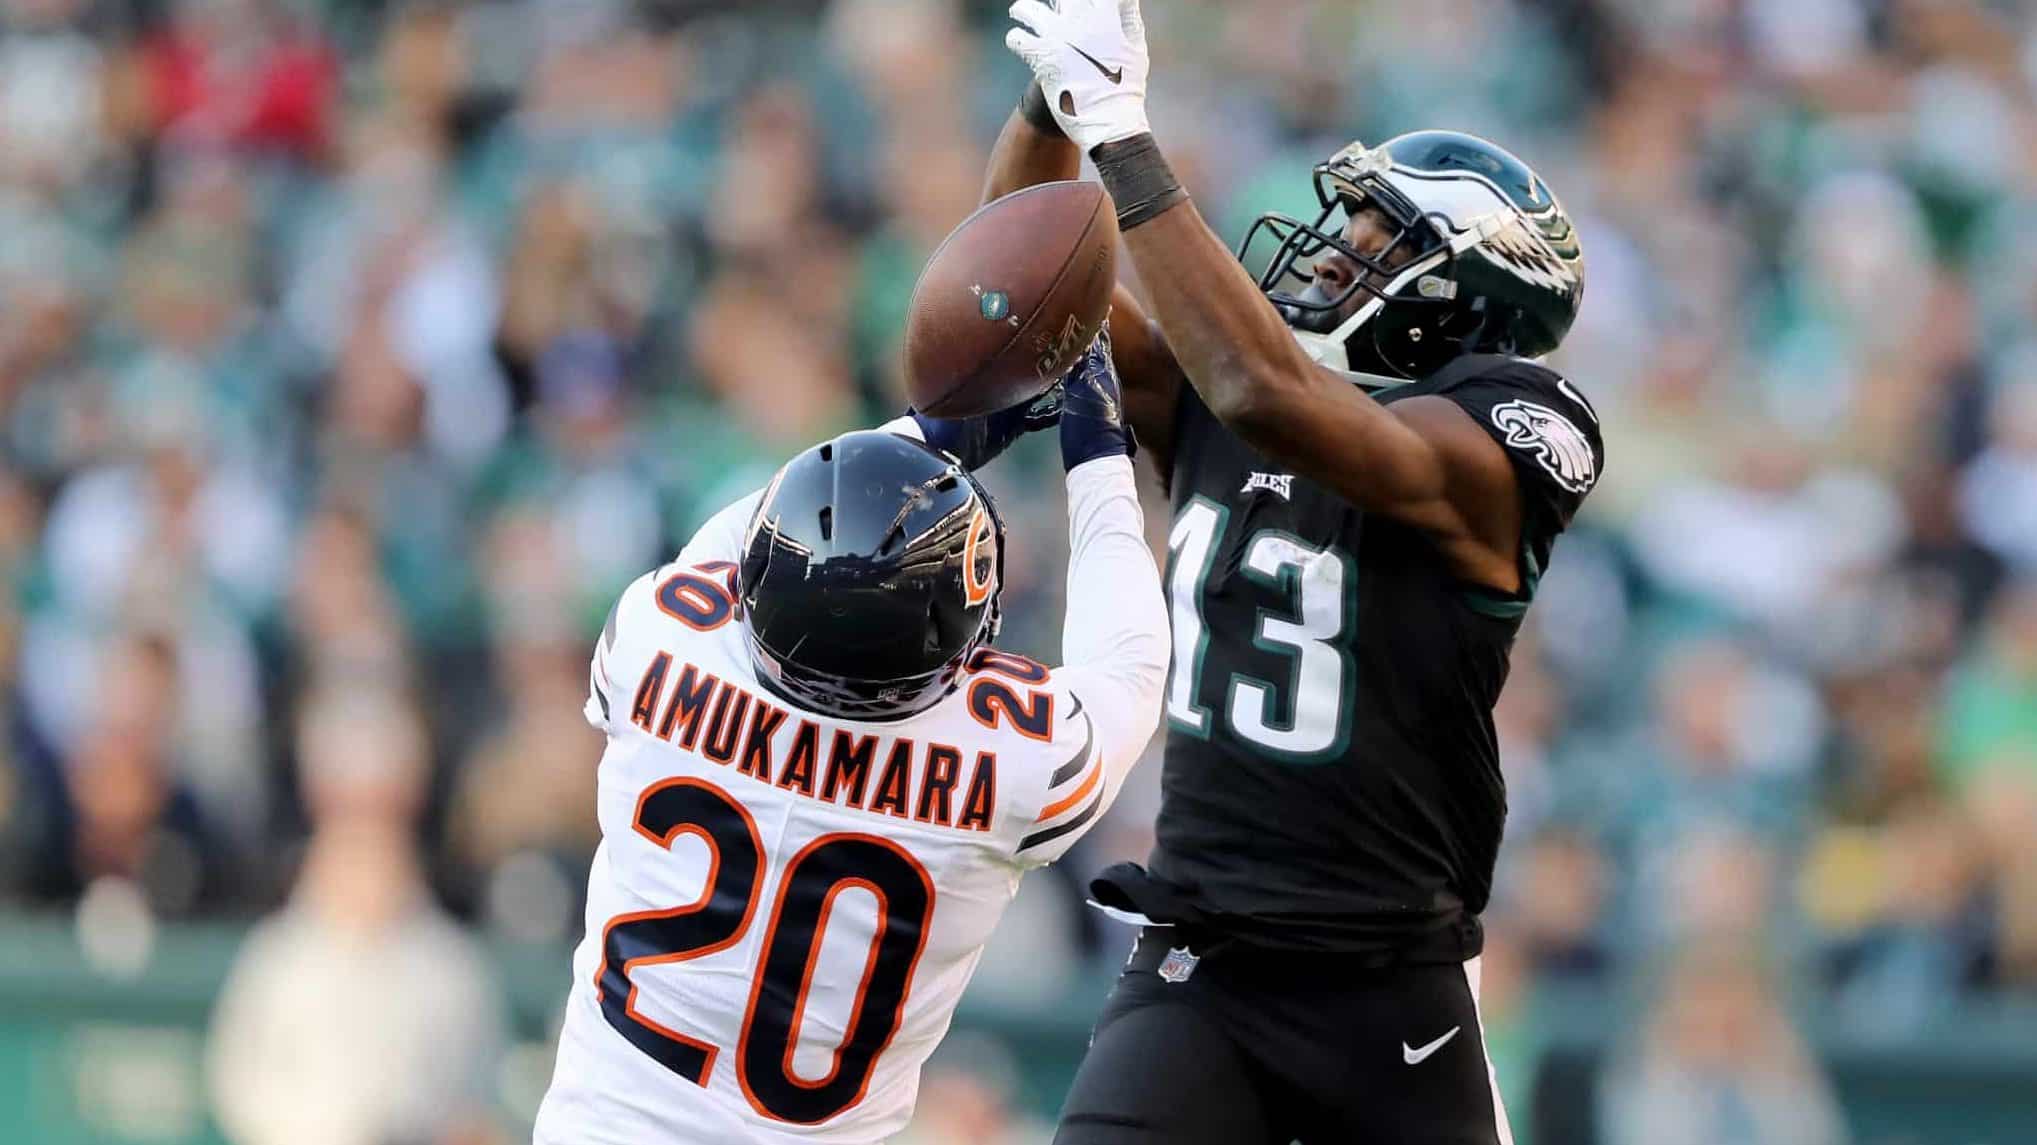 PHILADELPHIA, PENNSYLVANIA - NOVEMBER 03: Prince Amukamara #20 of the Chicago Bears breaks up a pass intended for Nelson Agholor #13 of the Philadelphia Eagles at Lincoln Financial Field on November 03, 2019 in Philadelphia, Pennsylvania.The Philadelphia Eagles defeated the Chicago Bears 22-14.